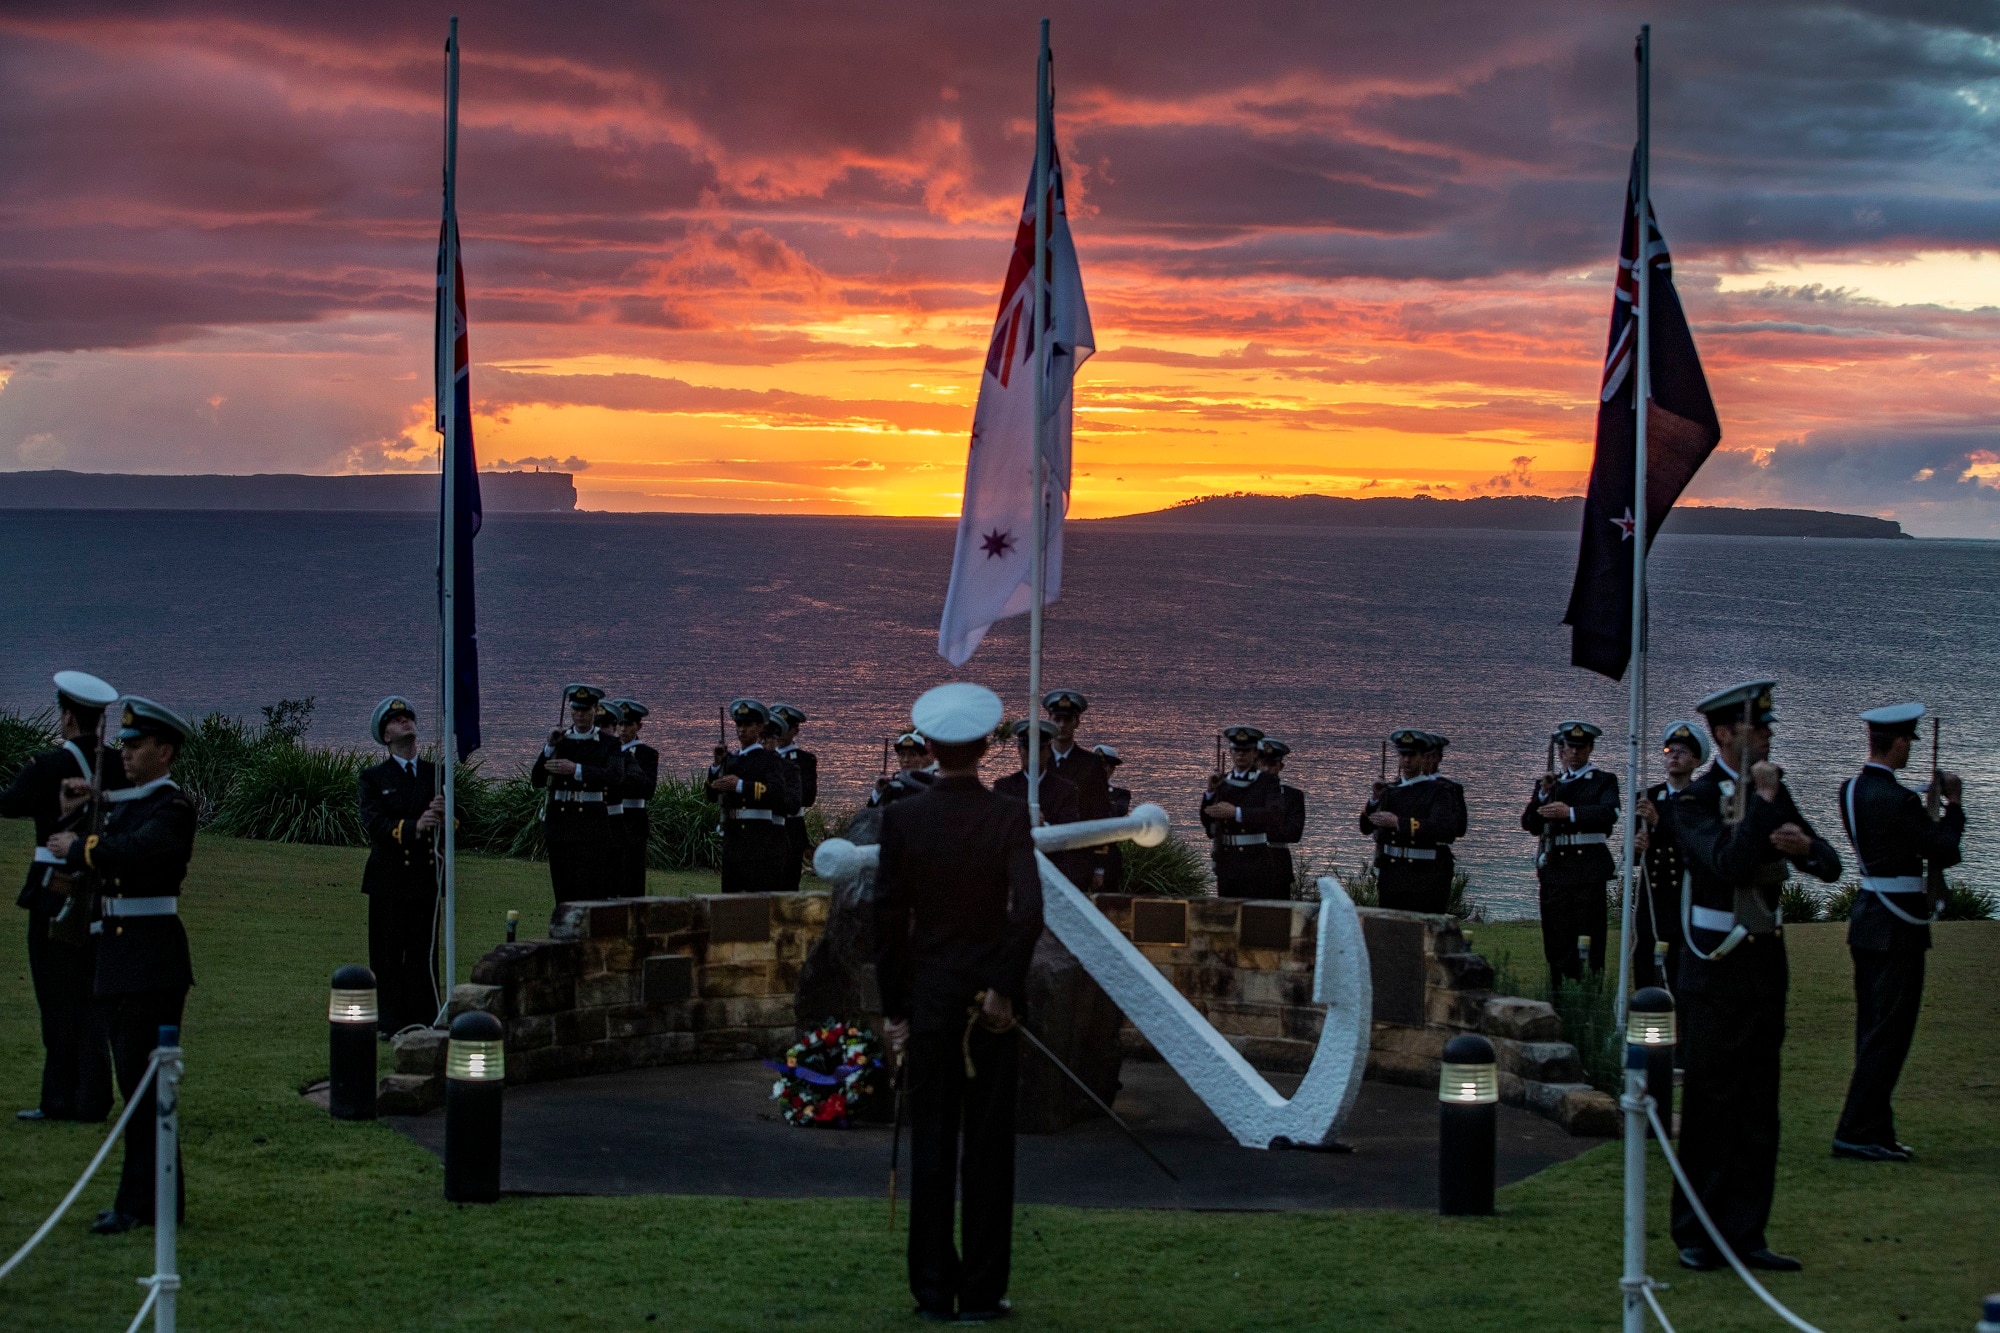 The sun rises over Point Perpendicular during the Anzac Day dawn service at HMAS Creswell, Jervis Bay in NSW.